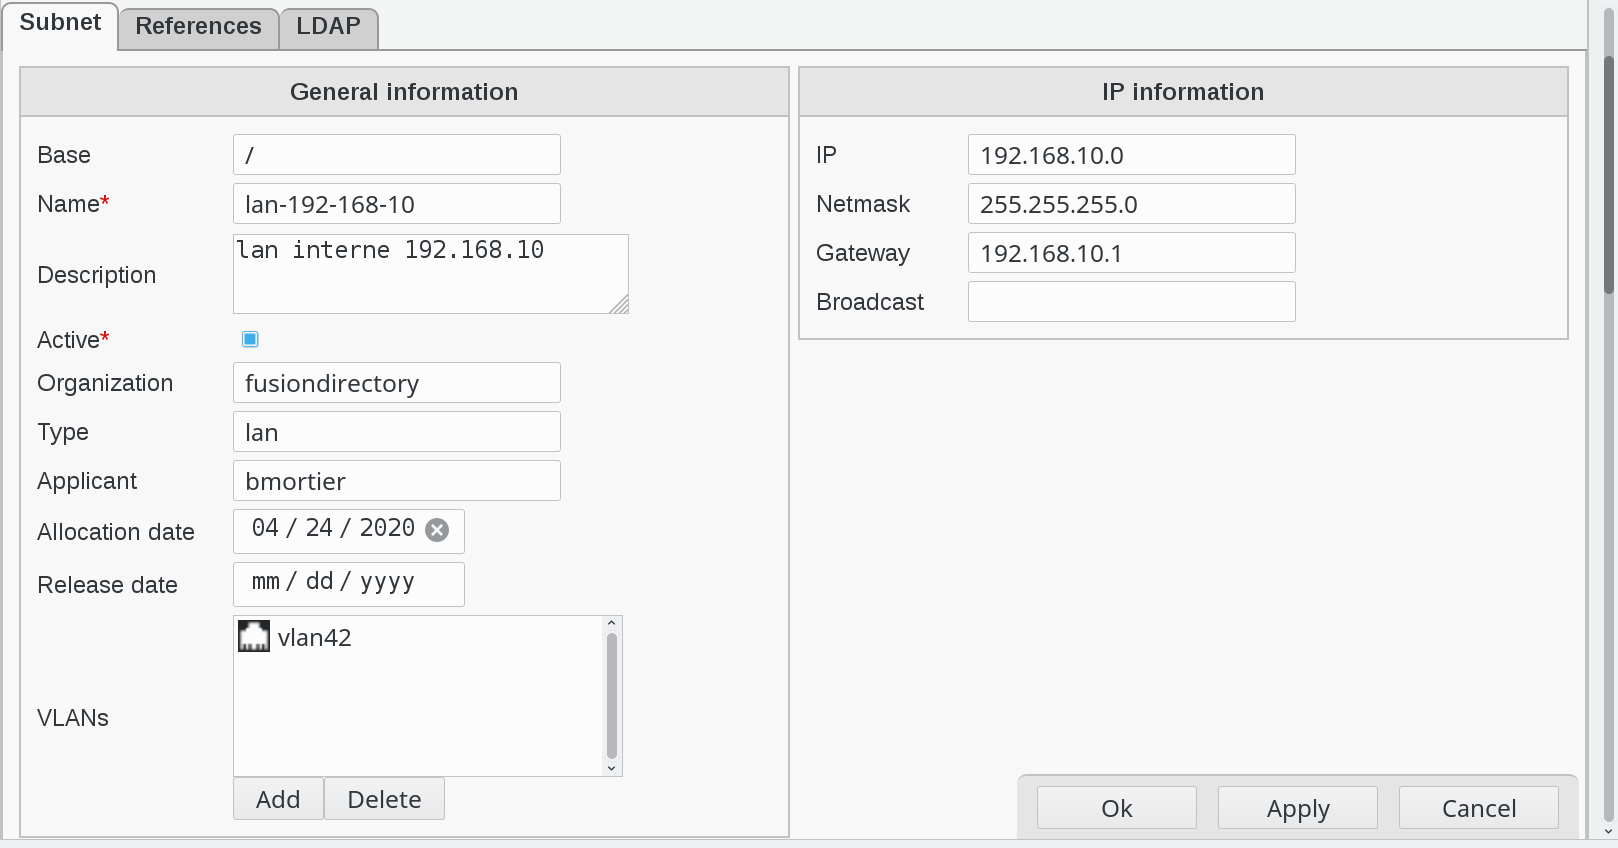 Picture of Subnet configuration page in FusionDirectory